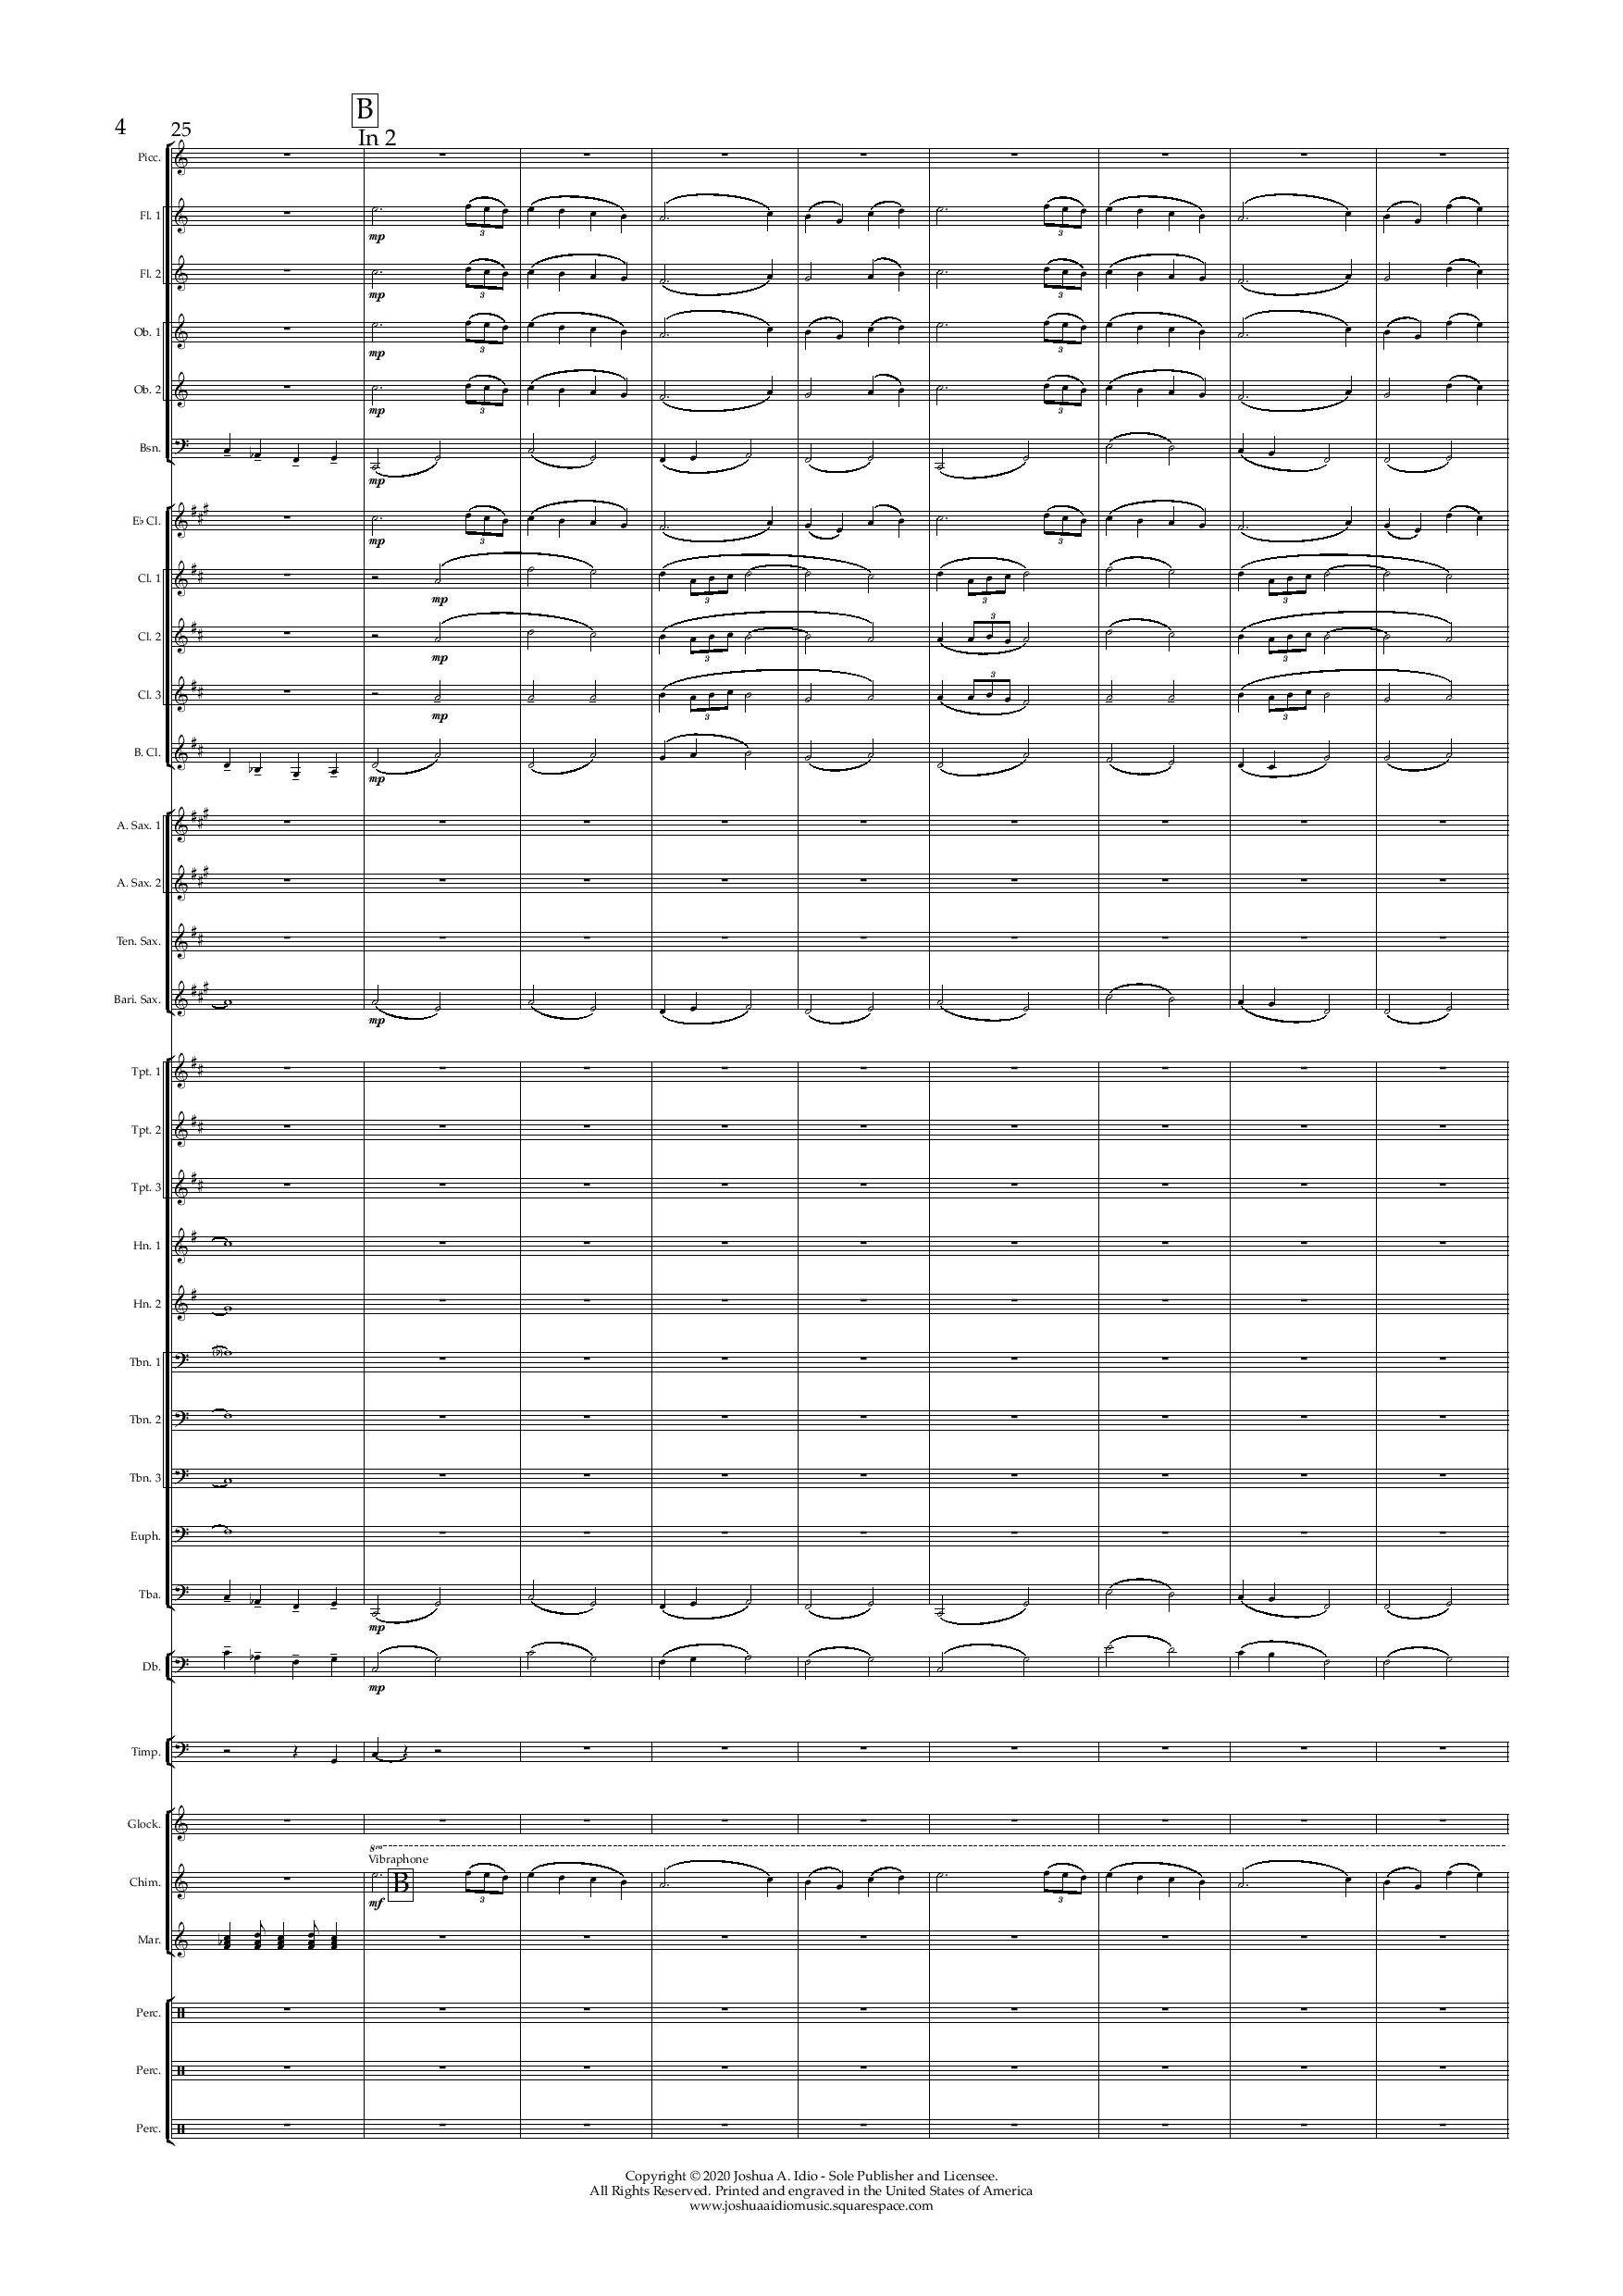 The Cruise Line Dream - Conductor s Score-page-004.jpg